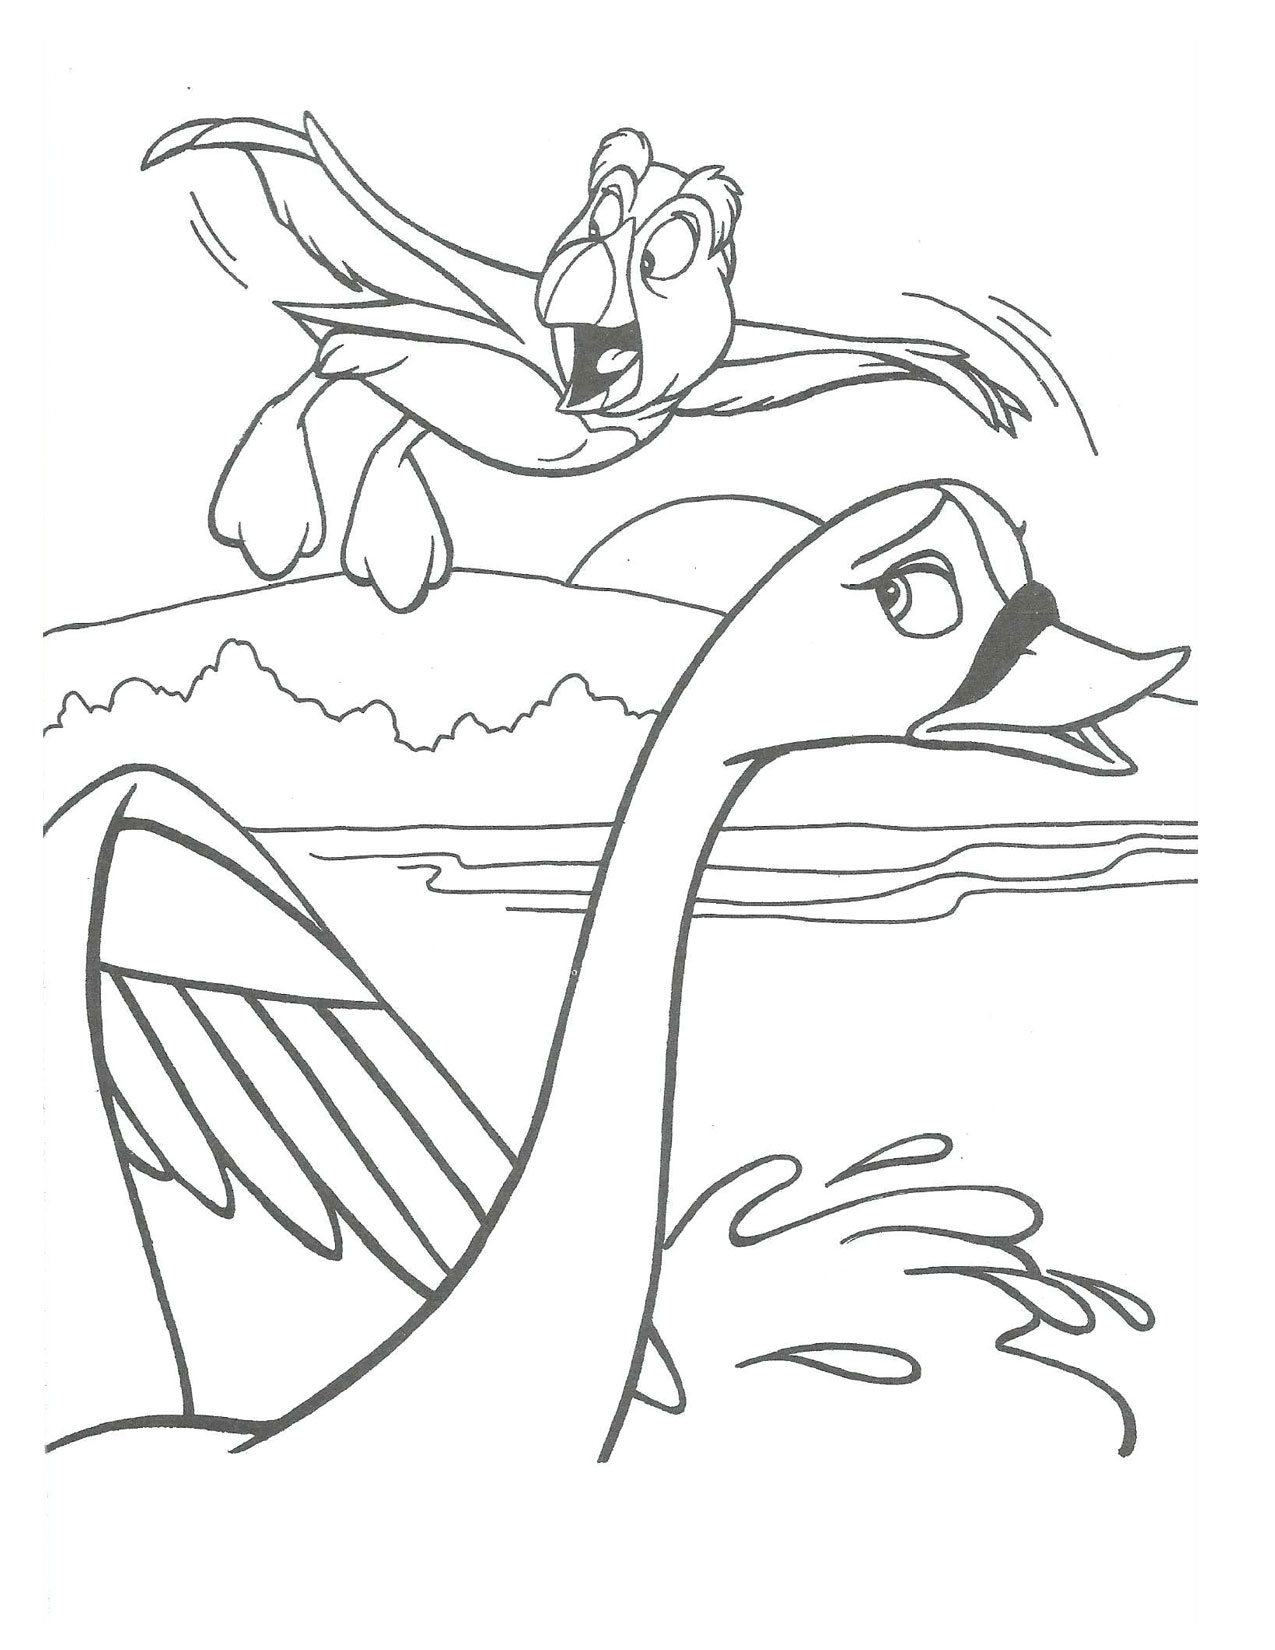 Swan Princess Odette and puffin coloring page